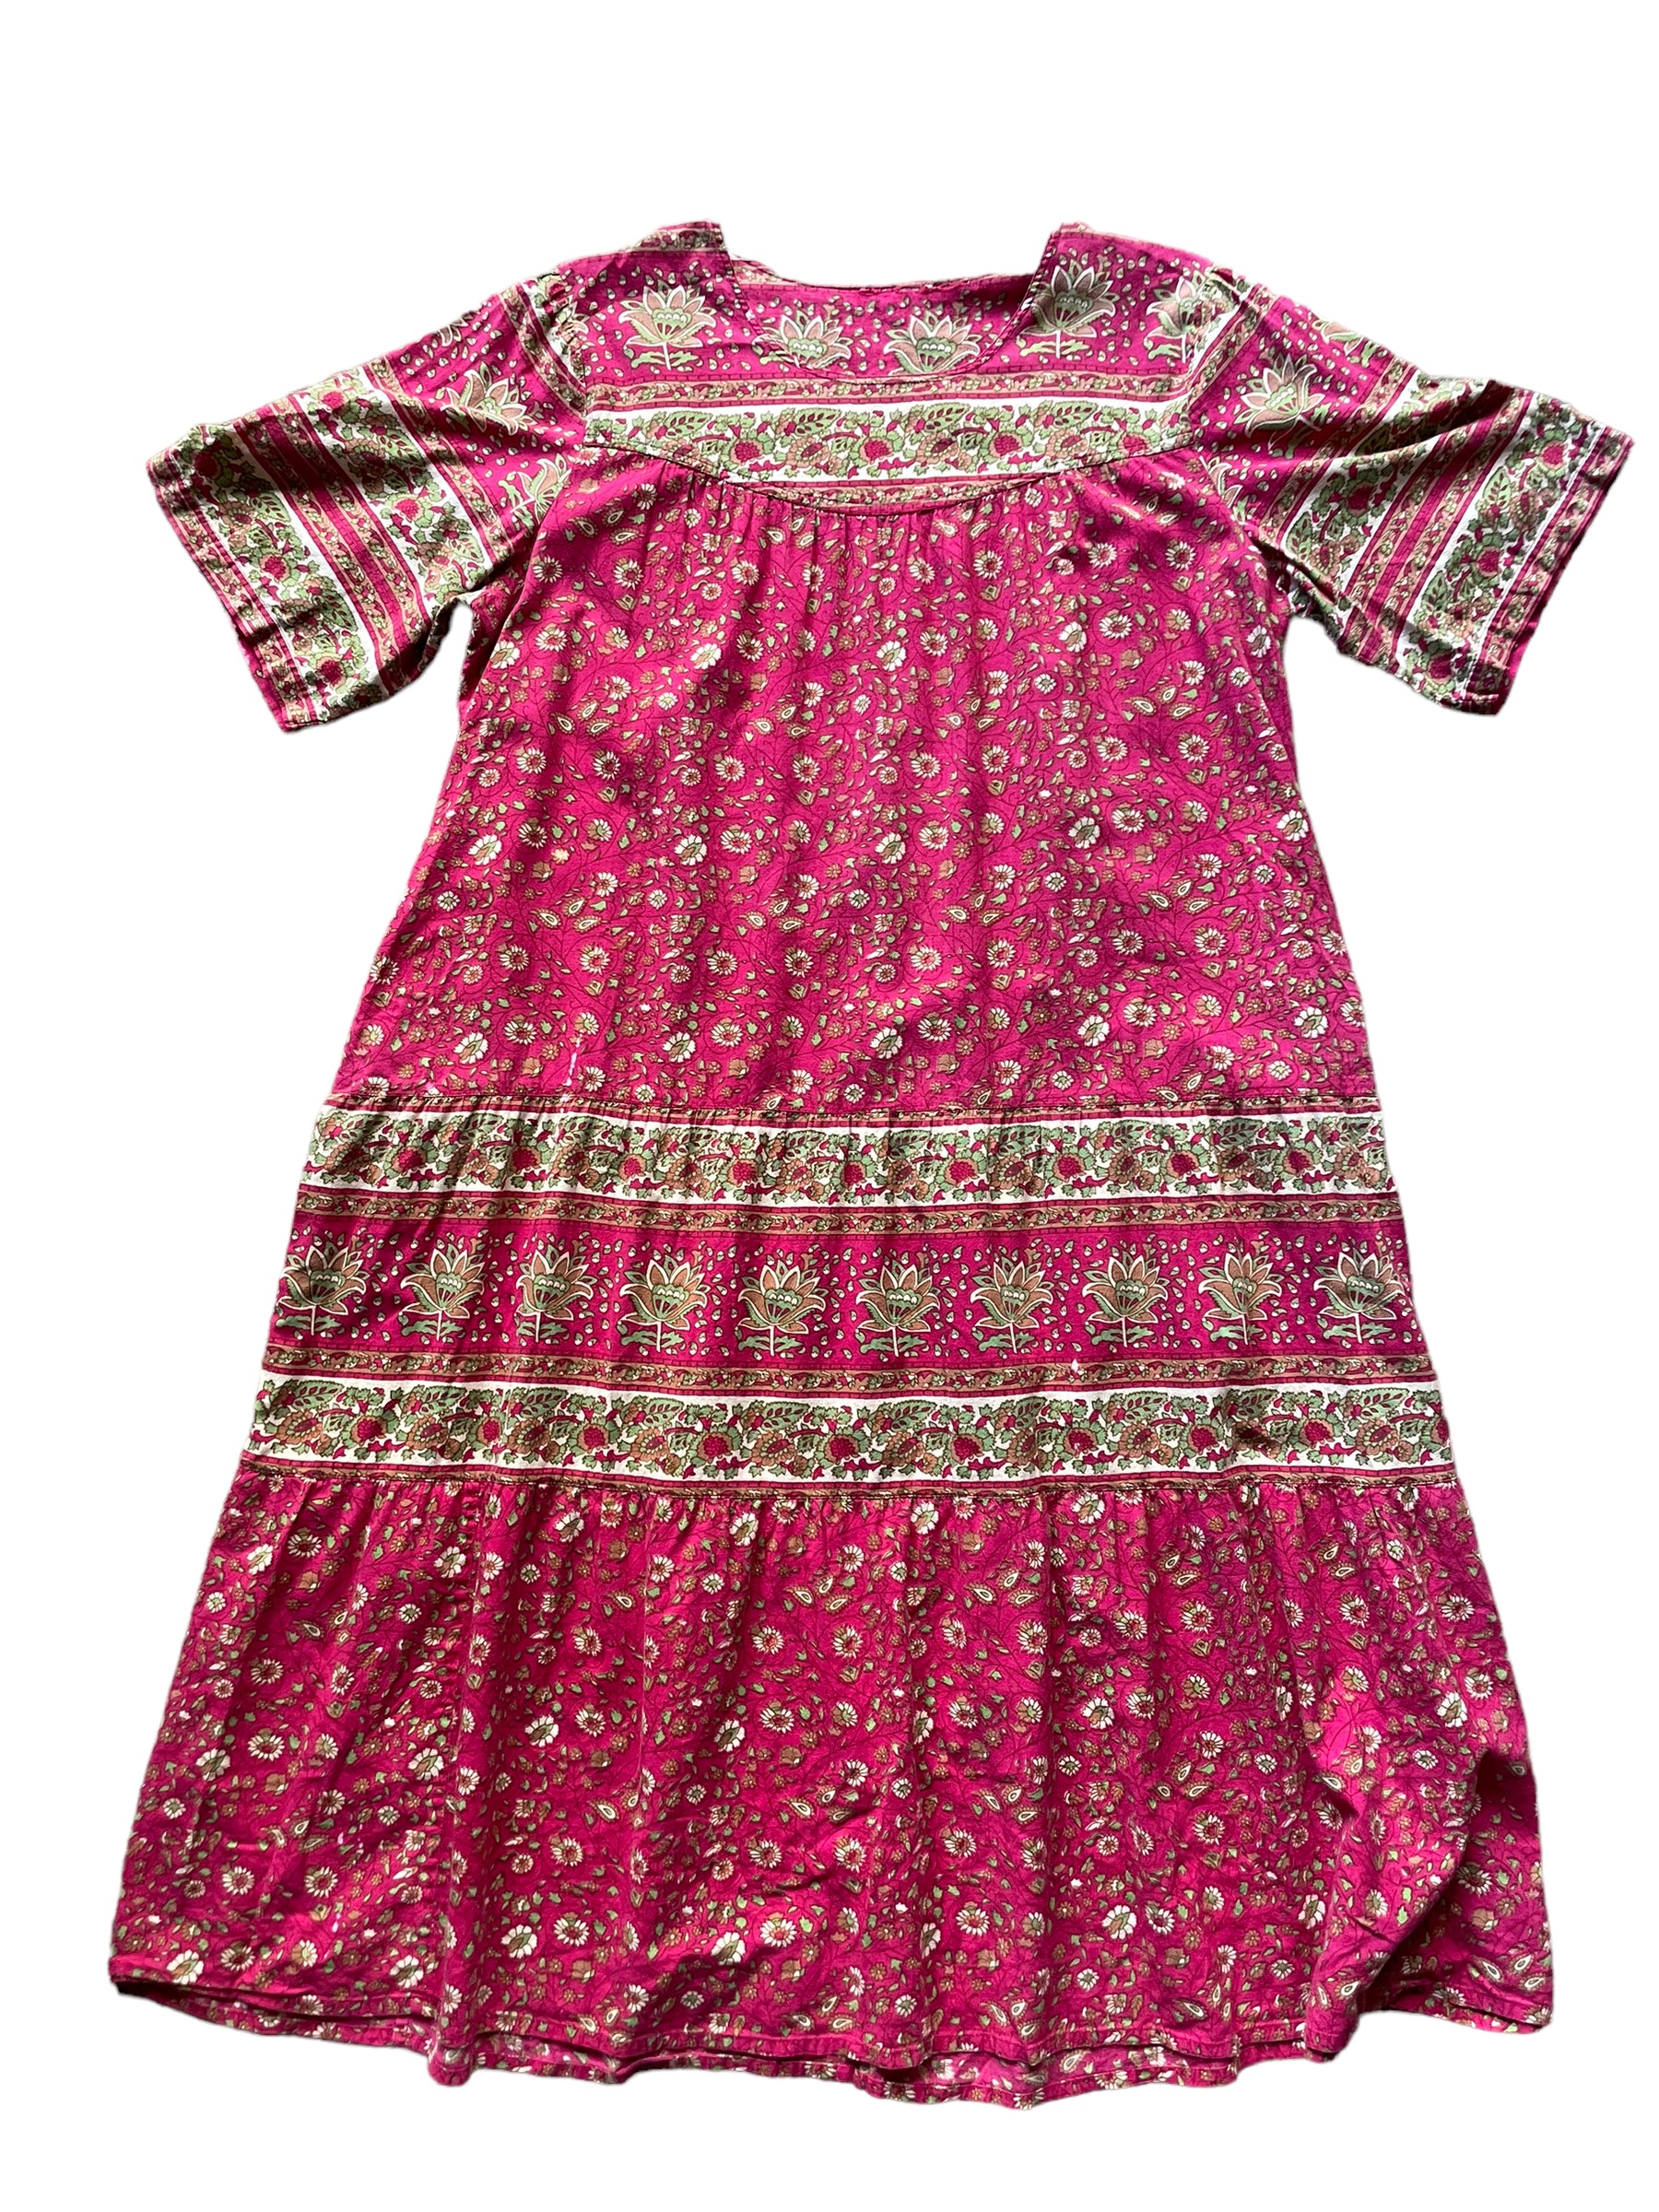 Full front view of Vintage 1970s Indian Cotton Dress Sz XL